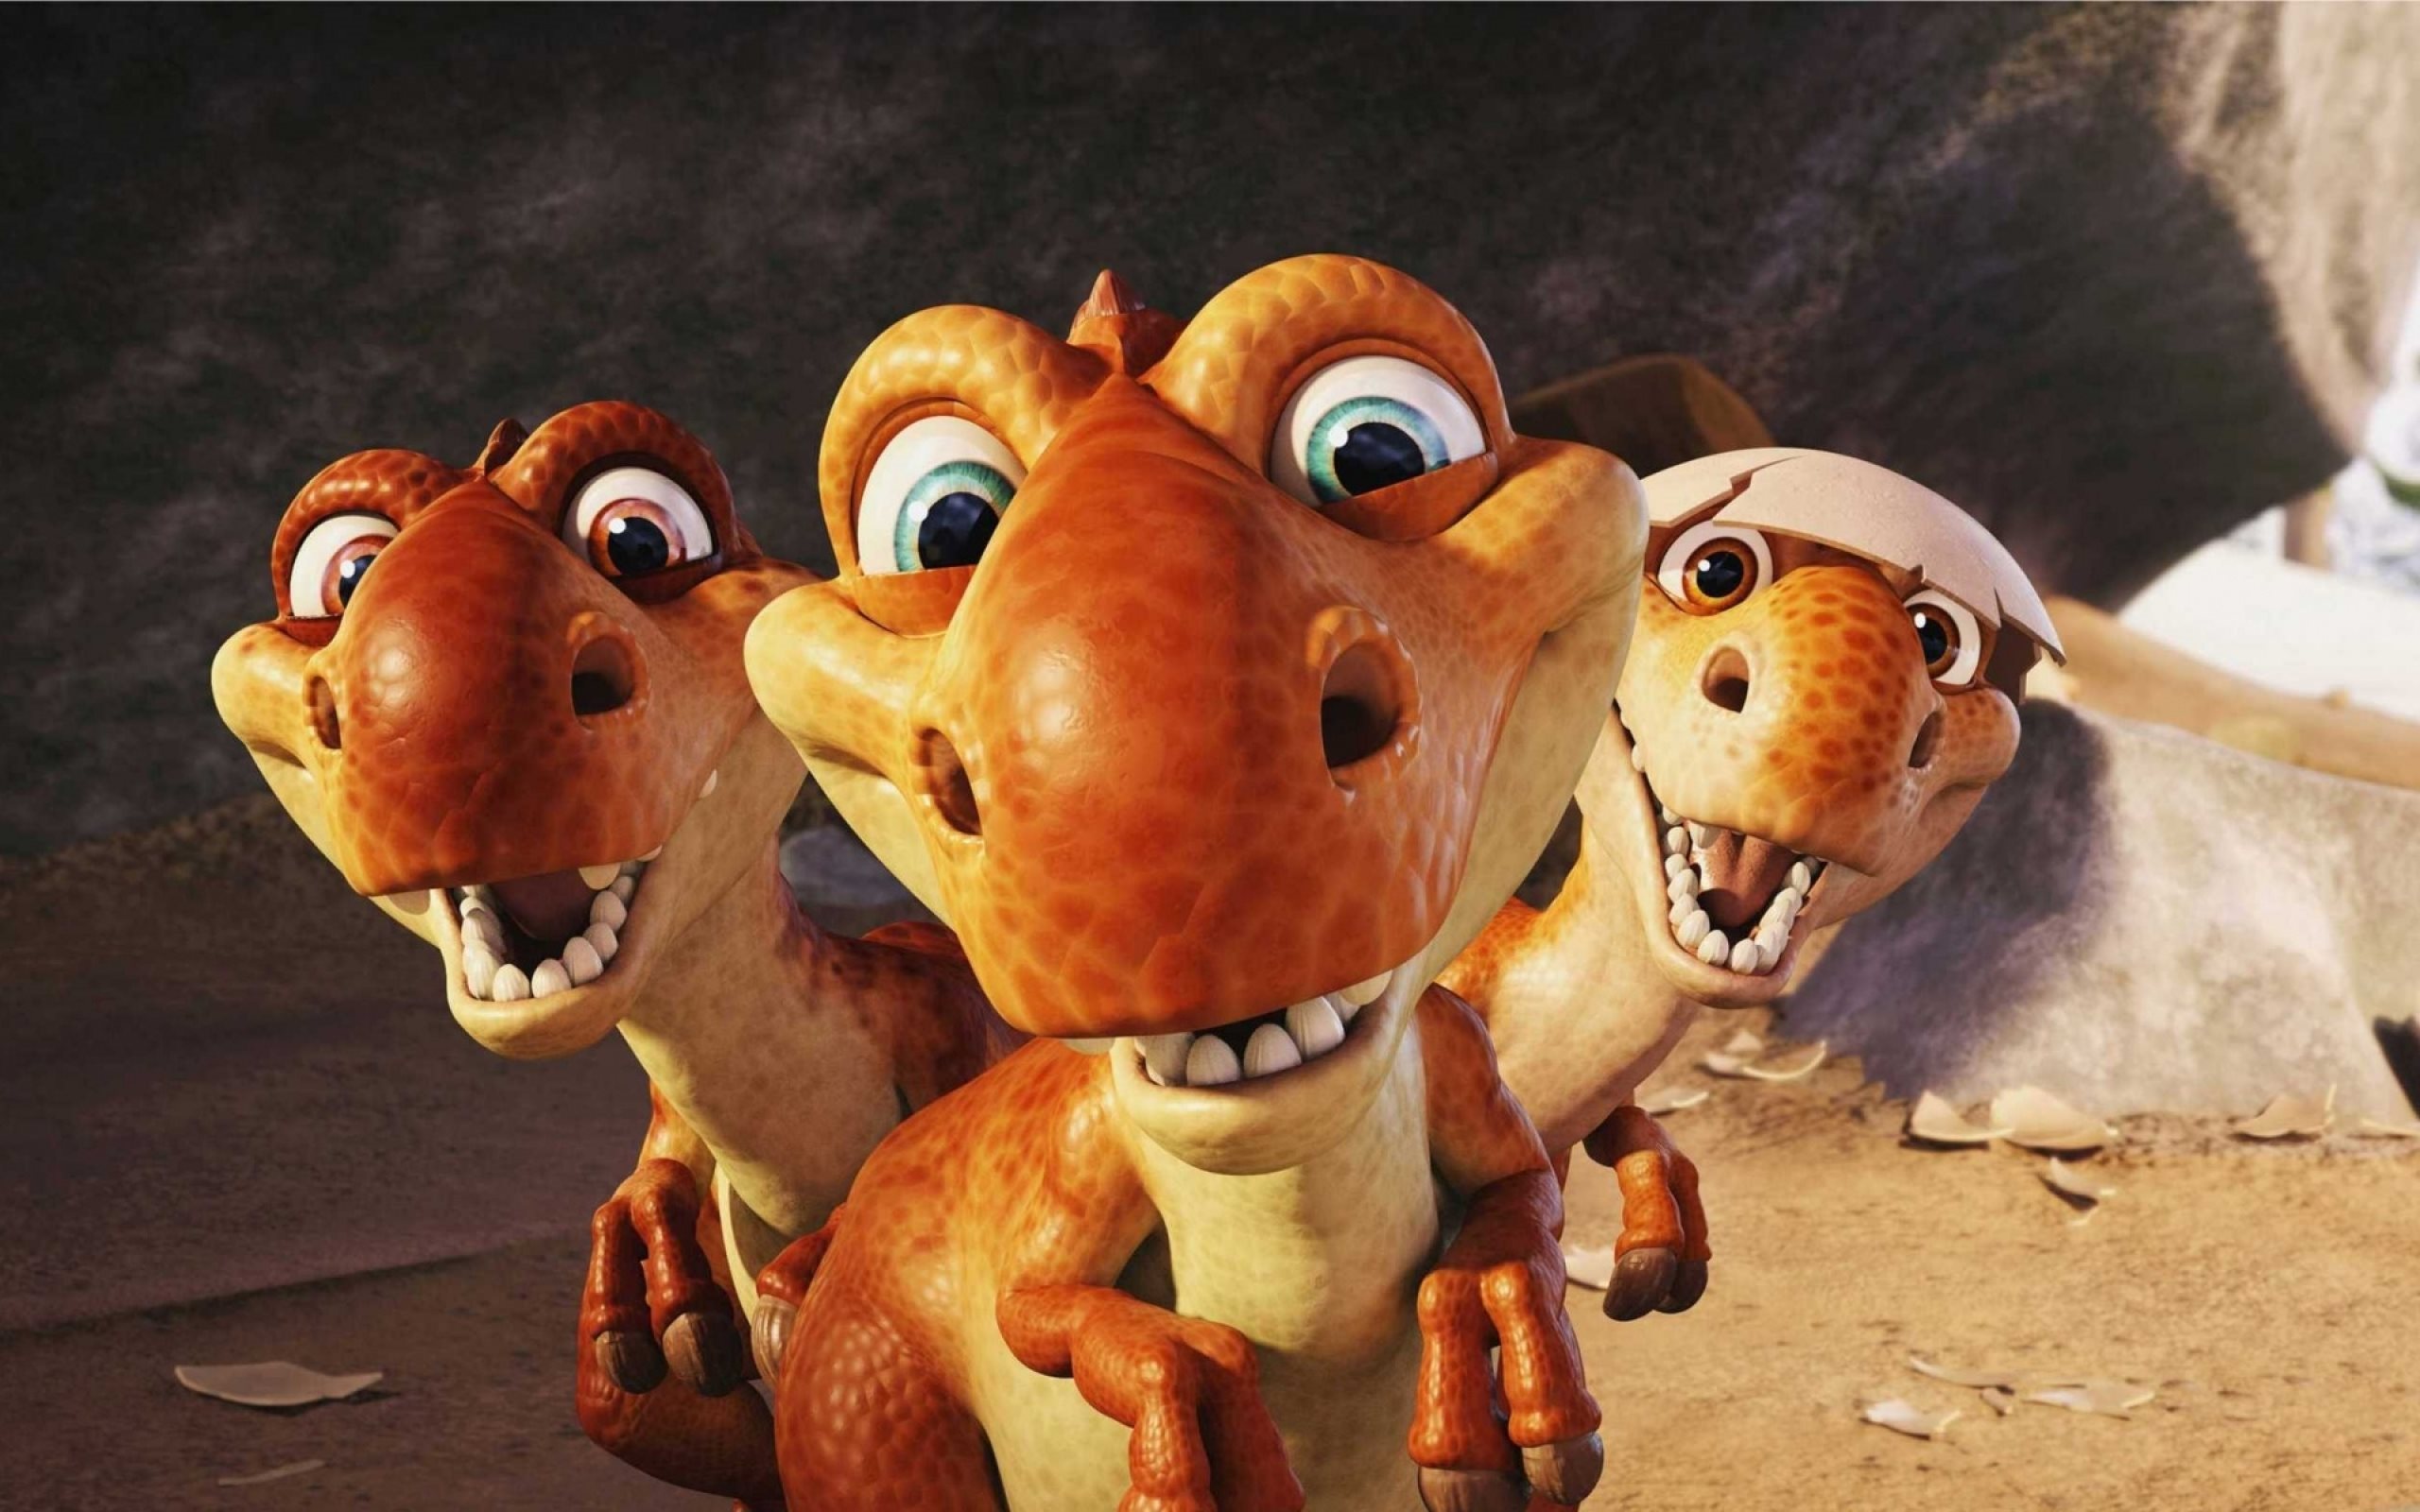 Download wallpaper Ice Age cartoon dinosaurs, Dawn of the Dinosaurs for desktop with resolution 2560x1600. High Quality HD picture wallpaper